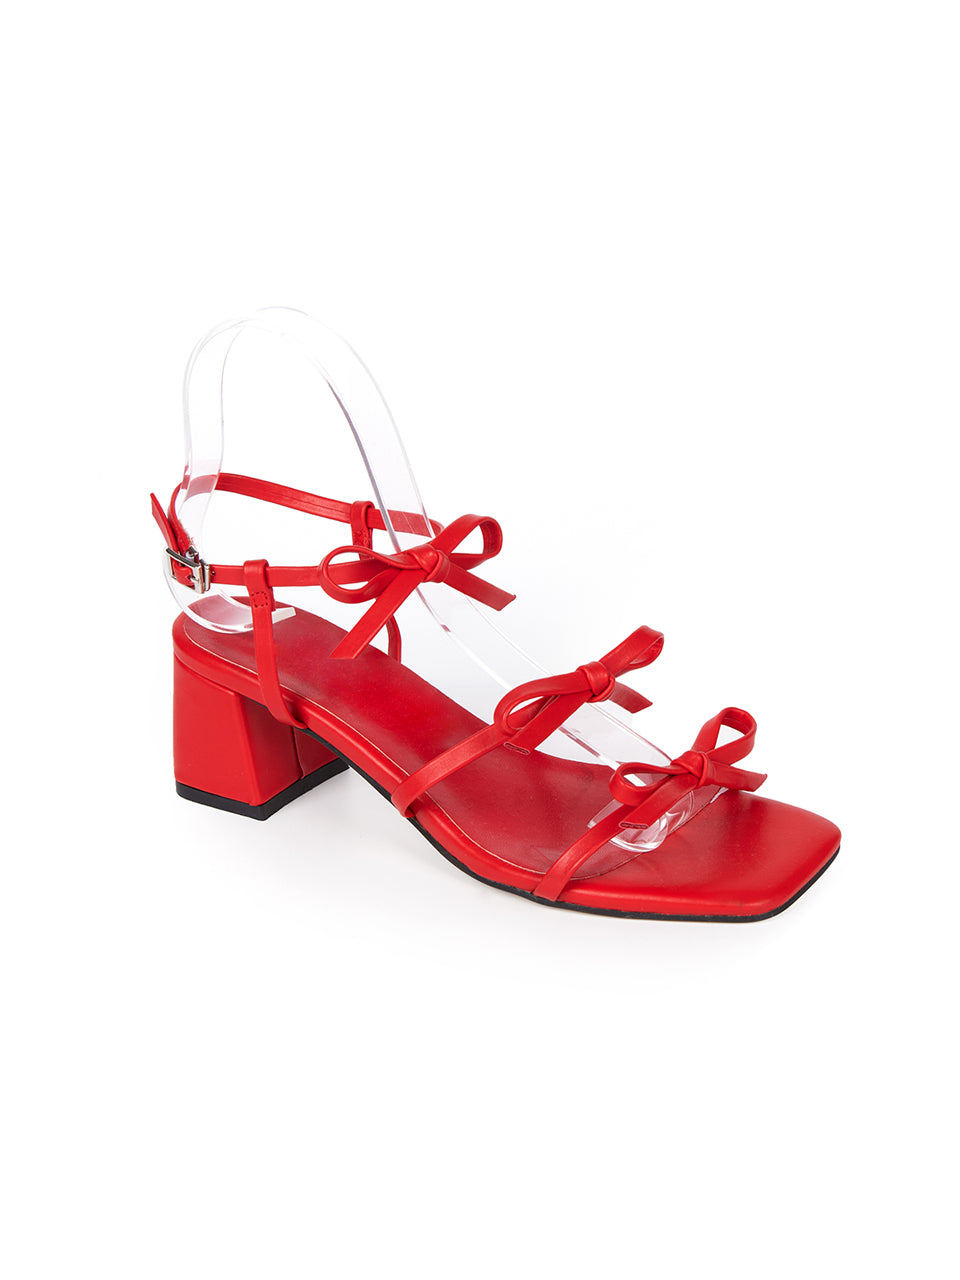 AR-3303 Ribbon Middle Heeled Sandals